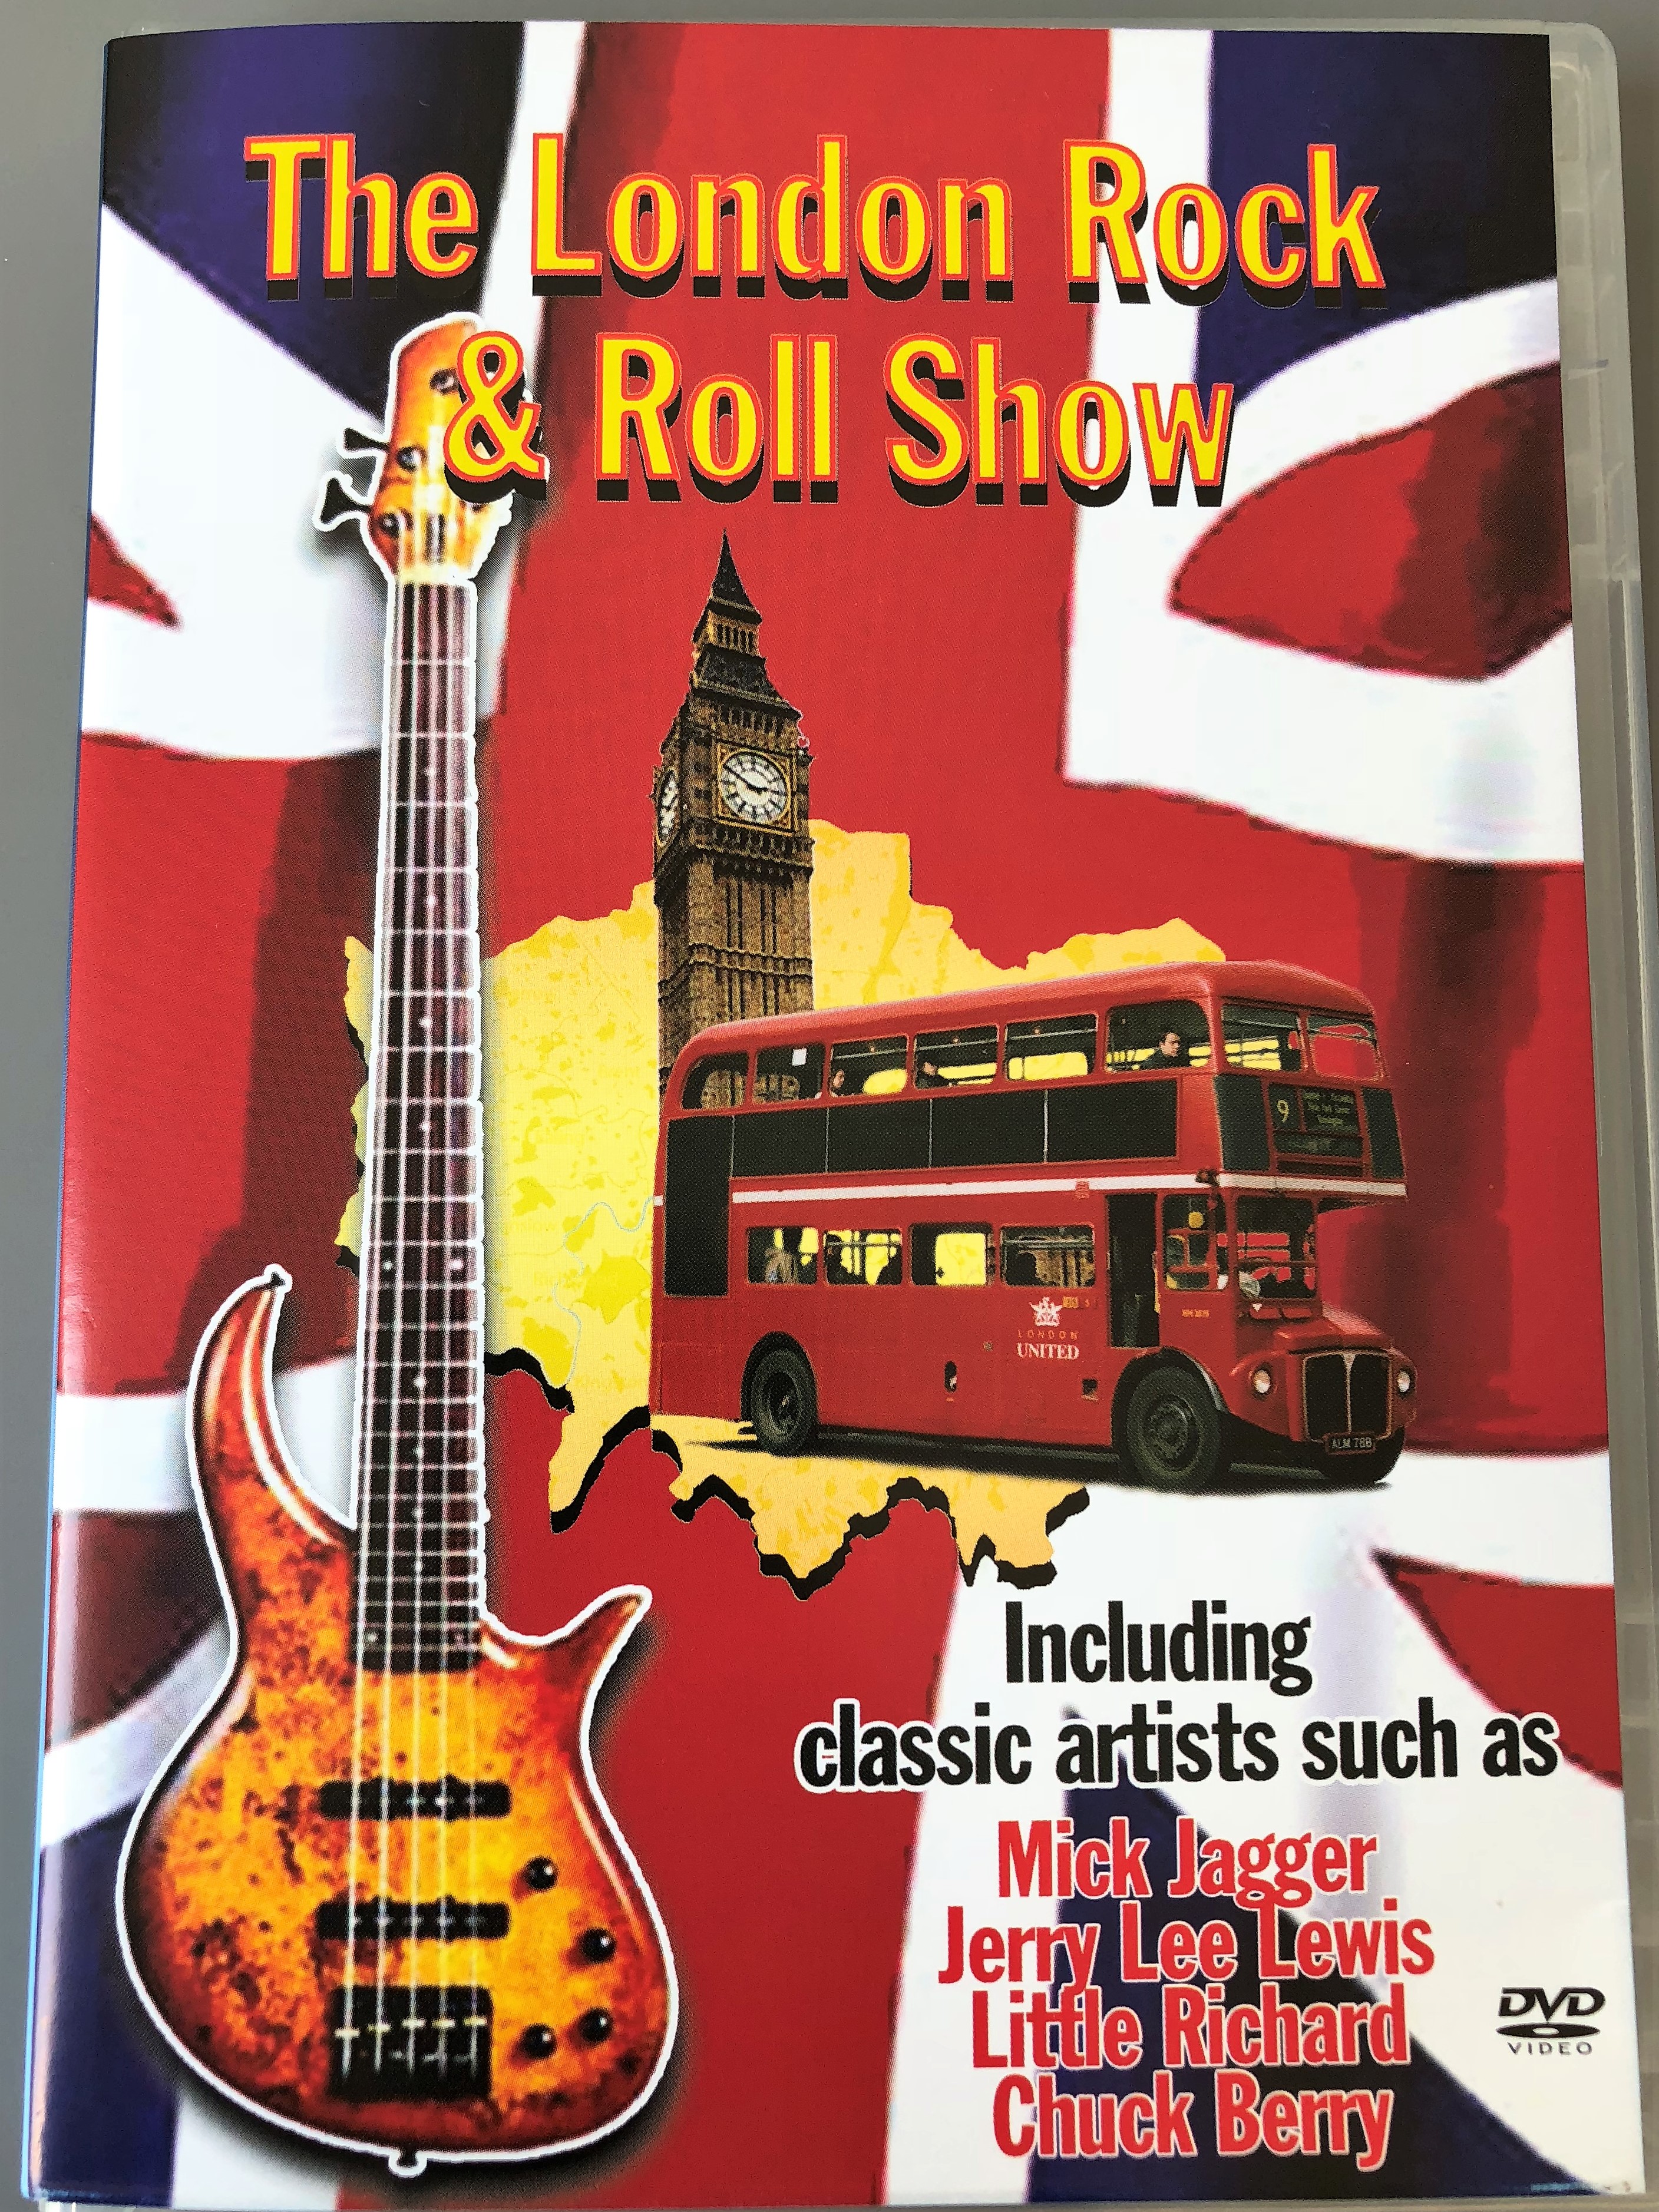 the-london-rock-roll-show-dvd-2005-including-classic-artists-such-as-mick-jagger-jerry-lee-lewis-little-richard-chuck-berry-directed-by-peter-clifton-rock-roll-concert-wembley-stadium-1972-1-.jpg